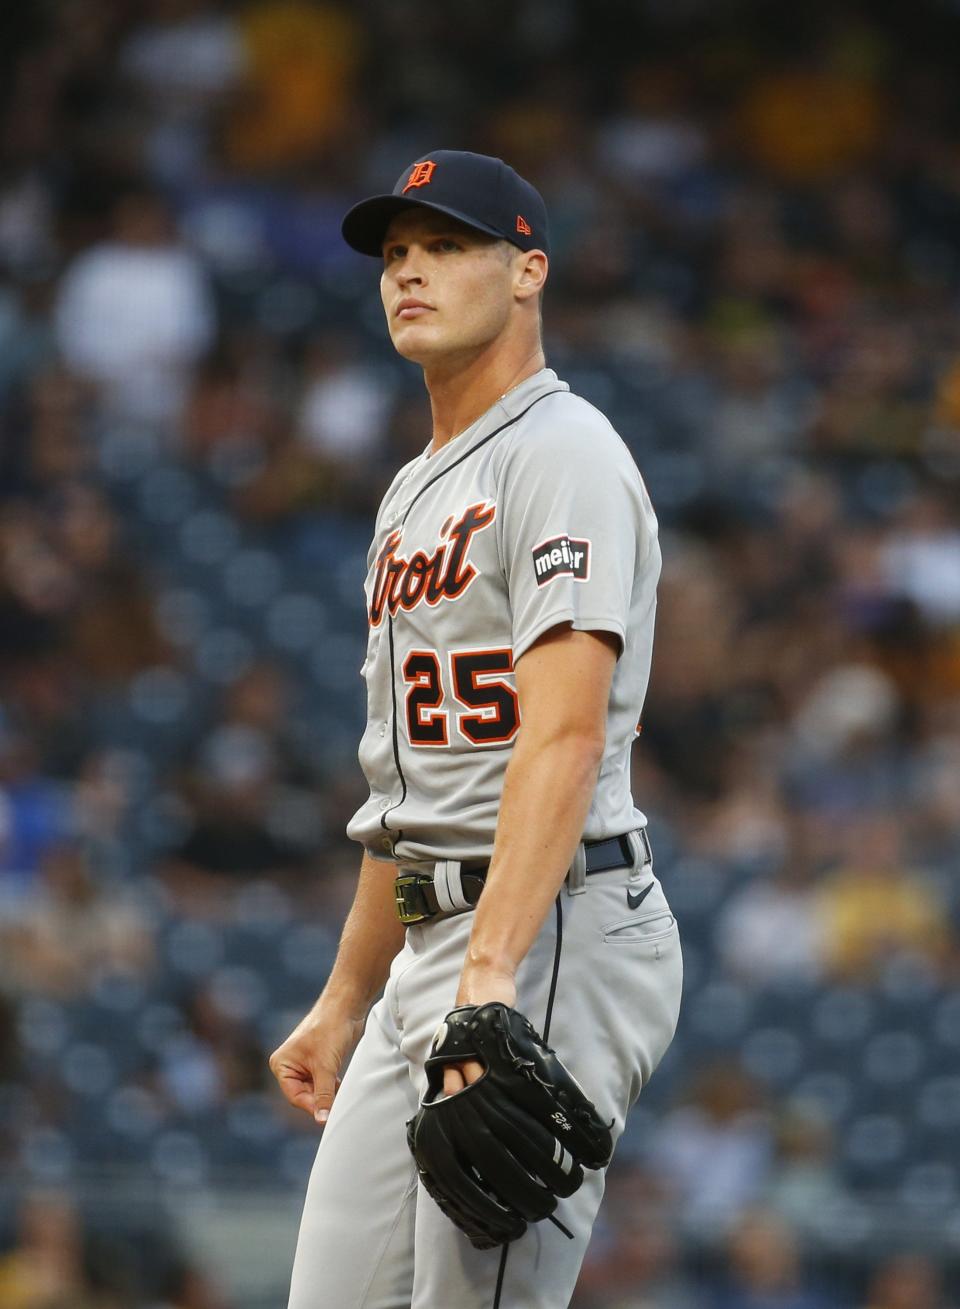 1570334938.jpg PITTSBURGH, PA - AUGUST 01:  Matt Manning #25 of the Detroit Tigers reacts after giving up a two run home run in the second inning against the Pittsburgh Pirates during inter-league play at PNC Park on August 1, 2023 in Pittsburgh, Pennsylvania.  (Photo by Justin K. Aller/Getty Images)